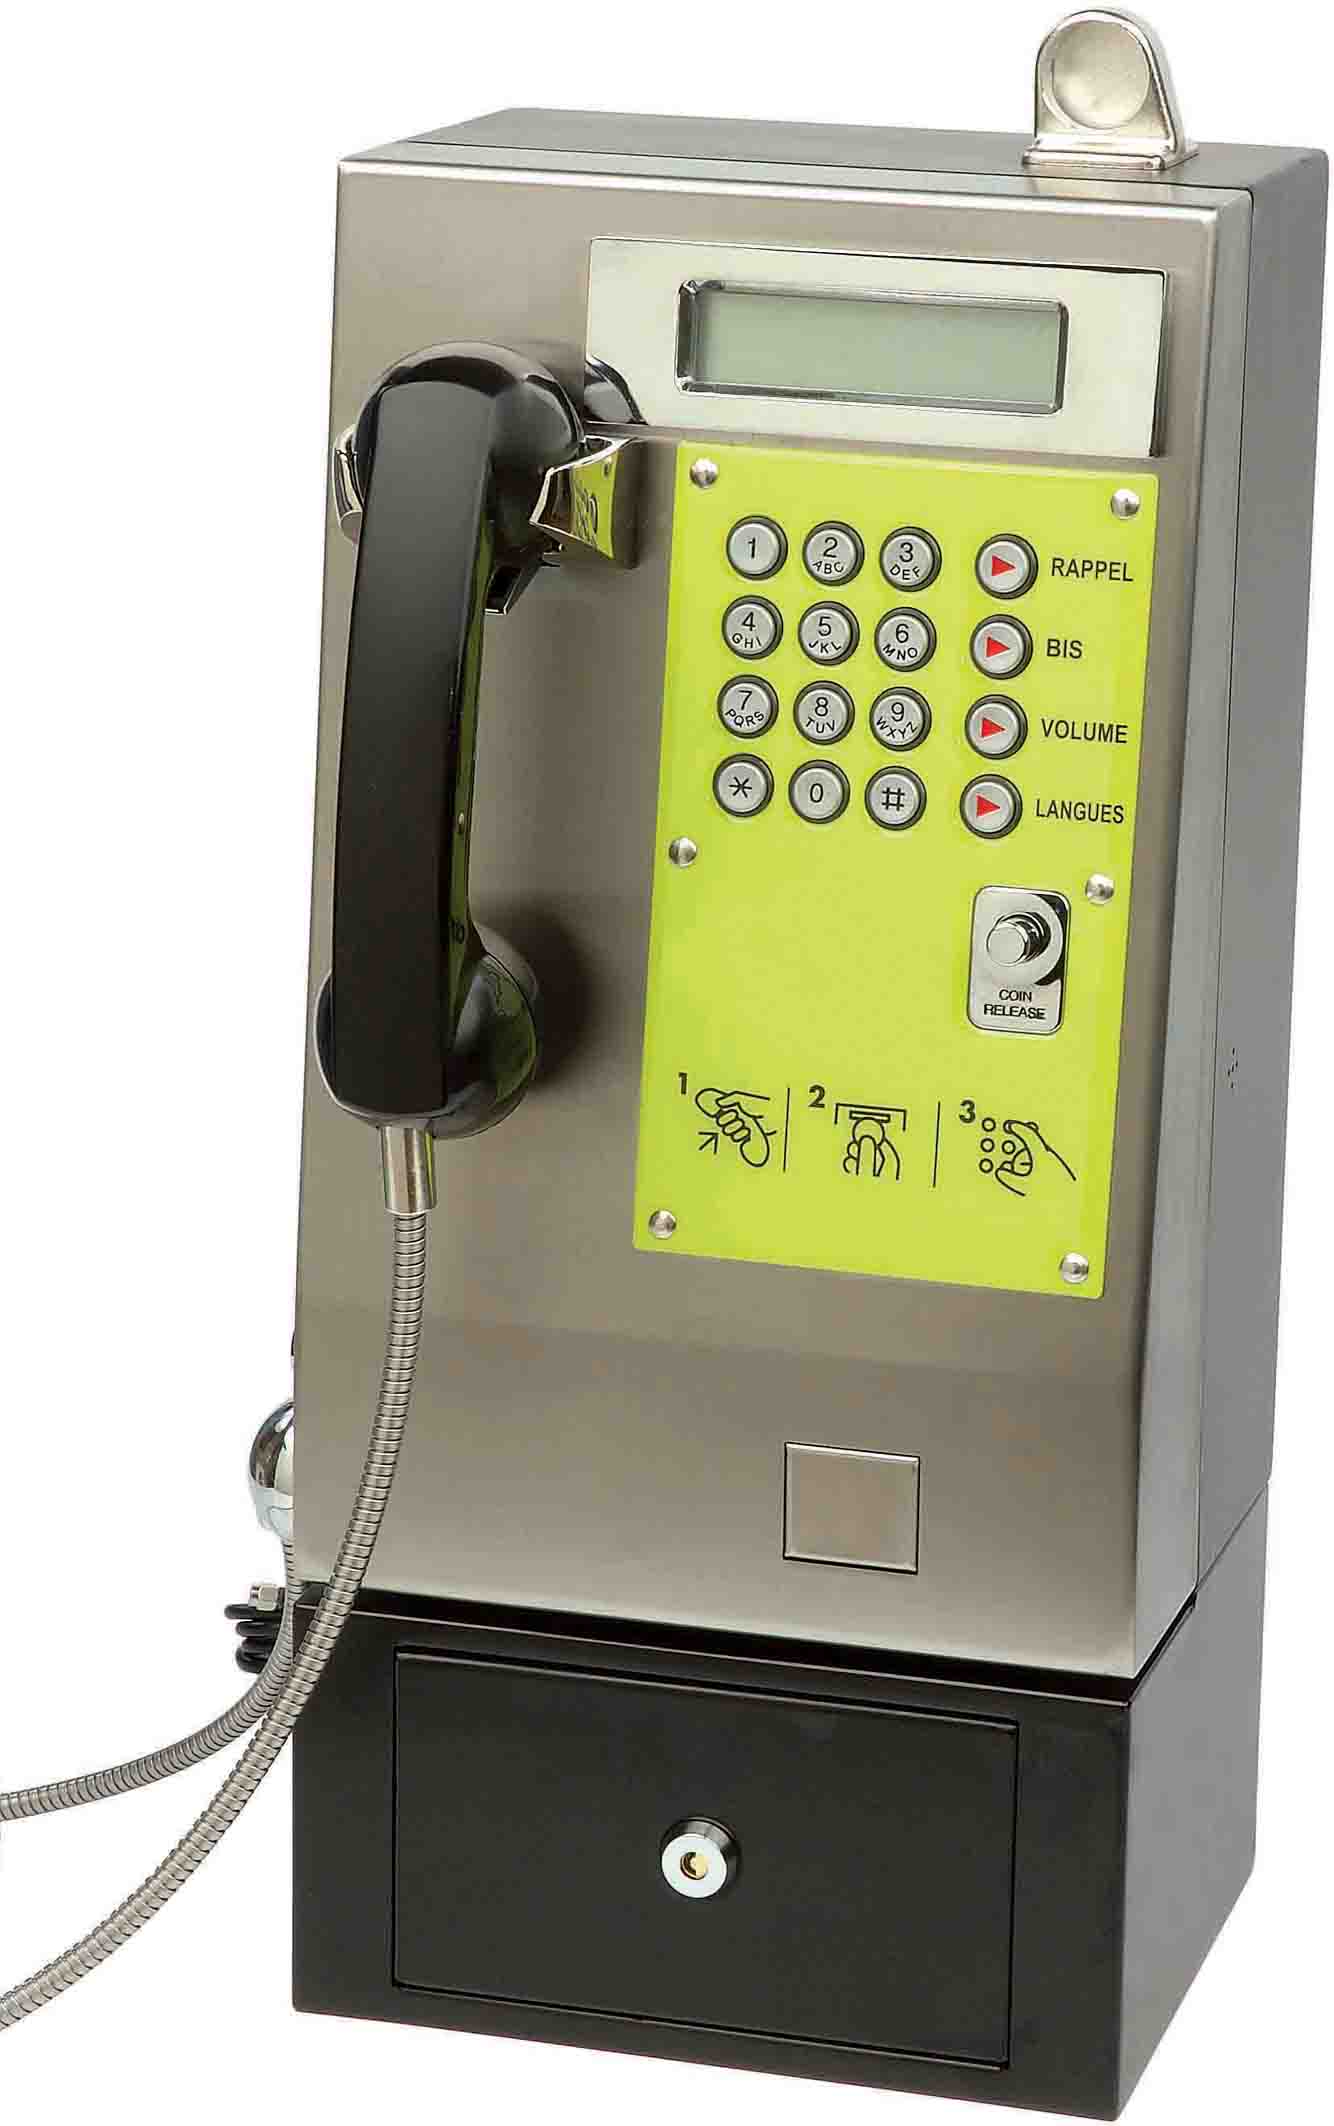  Coin Payphone Mx-03 / GSM Coin Payphone Mx-04 (Coin таксофонных MX-03 / GSM Coin таксофонных Mx-04)